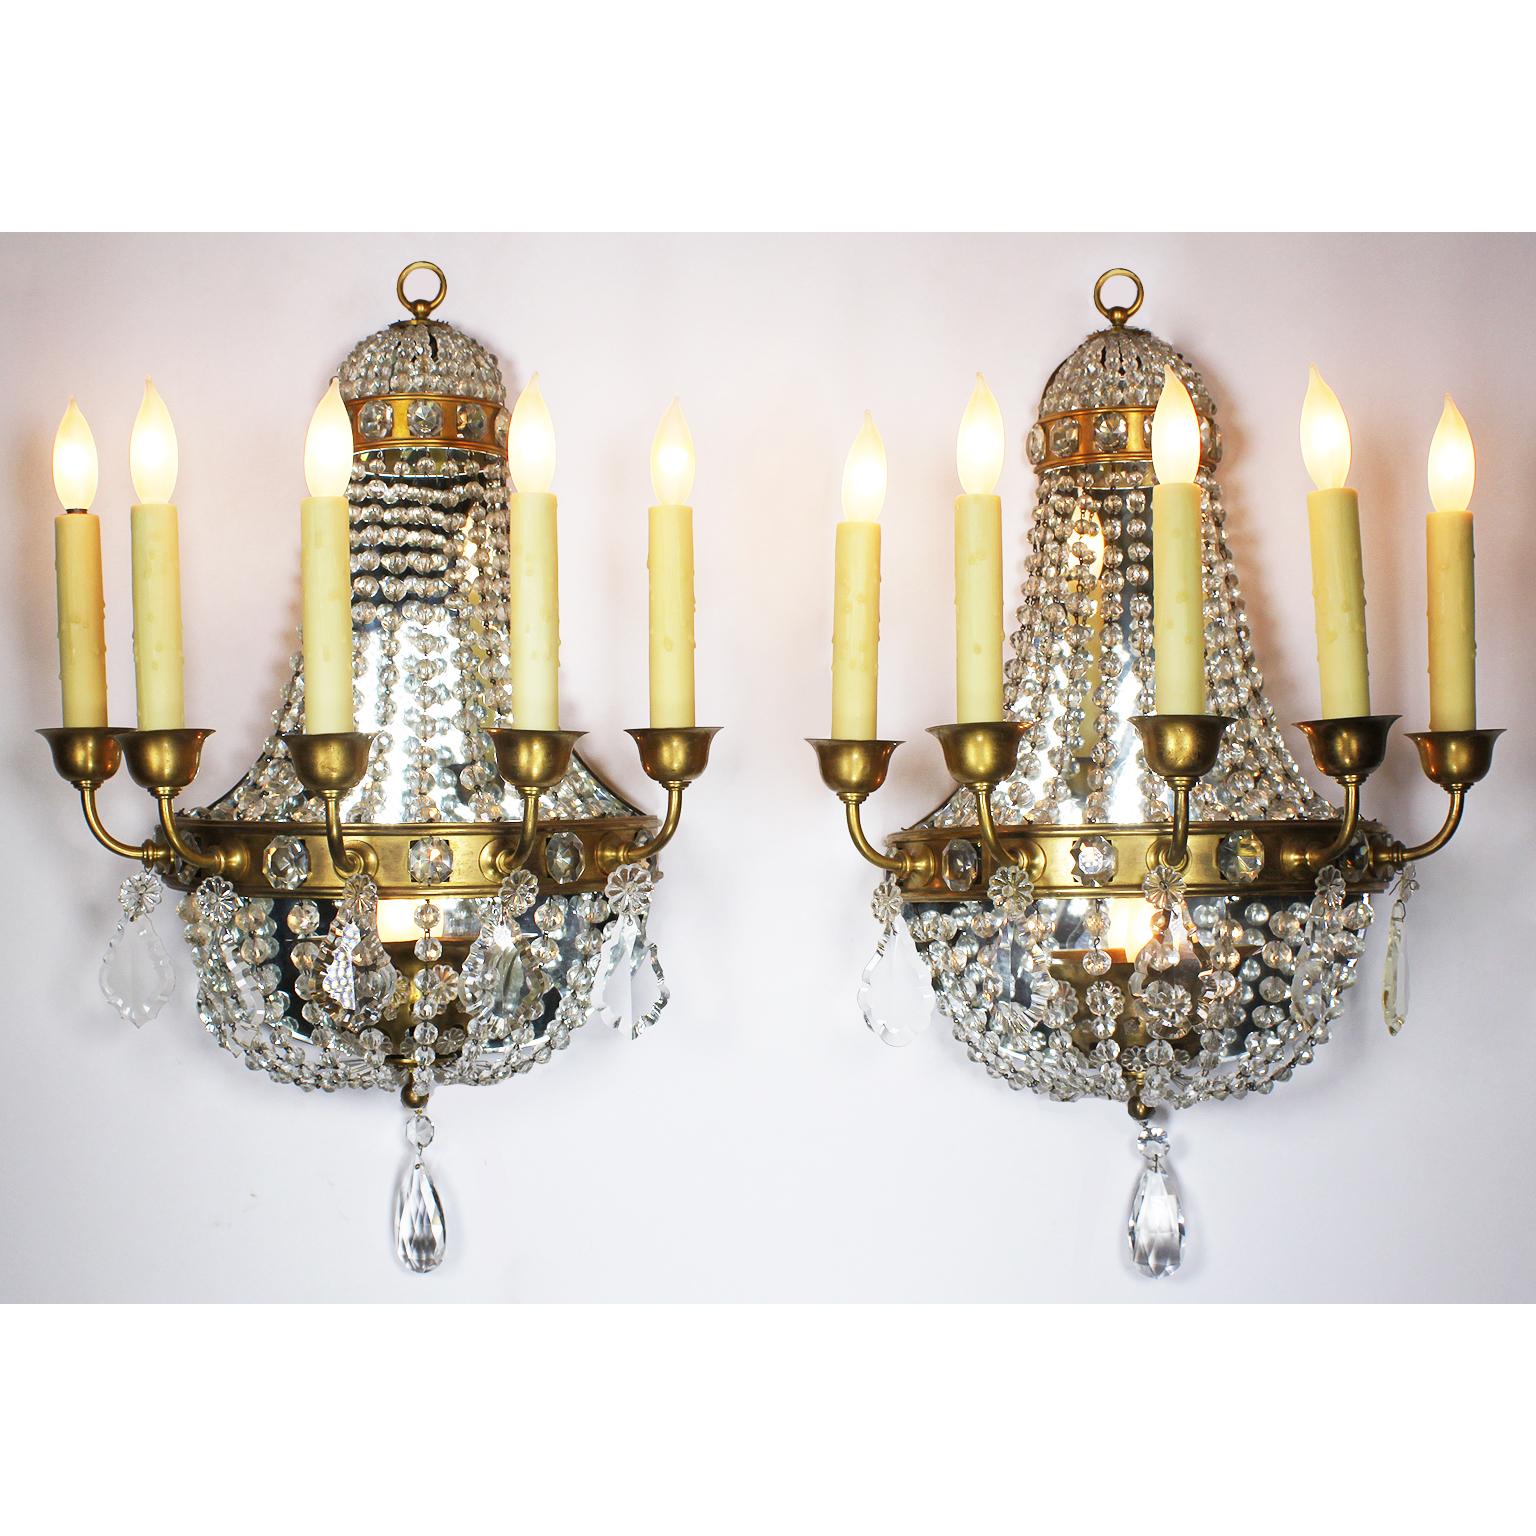 Gilt Pair of French Neoclassical Revival Louis XVI Style Cut-Glass Wall Sconces For Sale